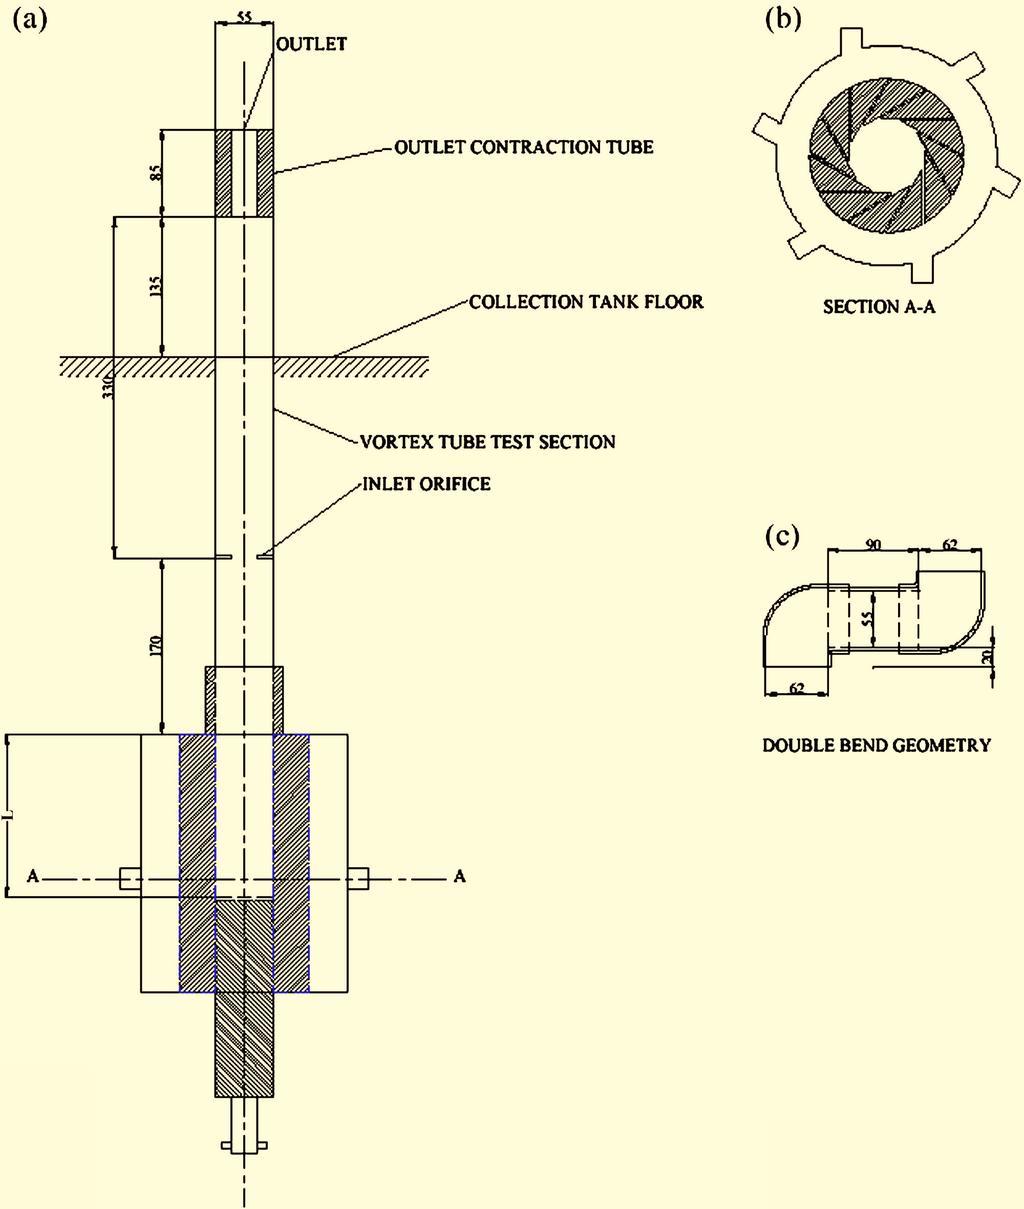 125103-2 Escudier, Nickson, and Poole Phys. Fluids 18, 125103 2006 FIG. 1. Basic layout of swirl generator and pipe assembly with details of the swirl generator and the double-elbow outlet all dimensions in mm.